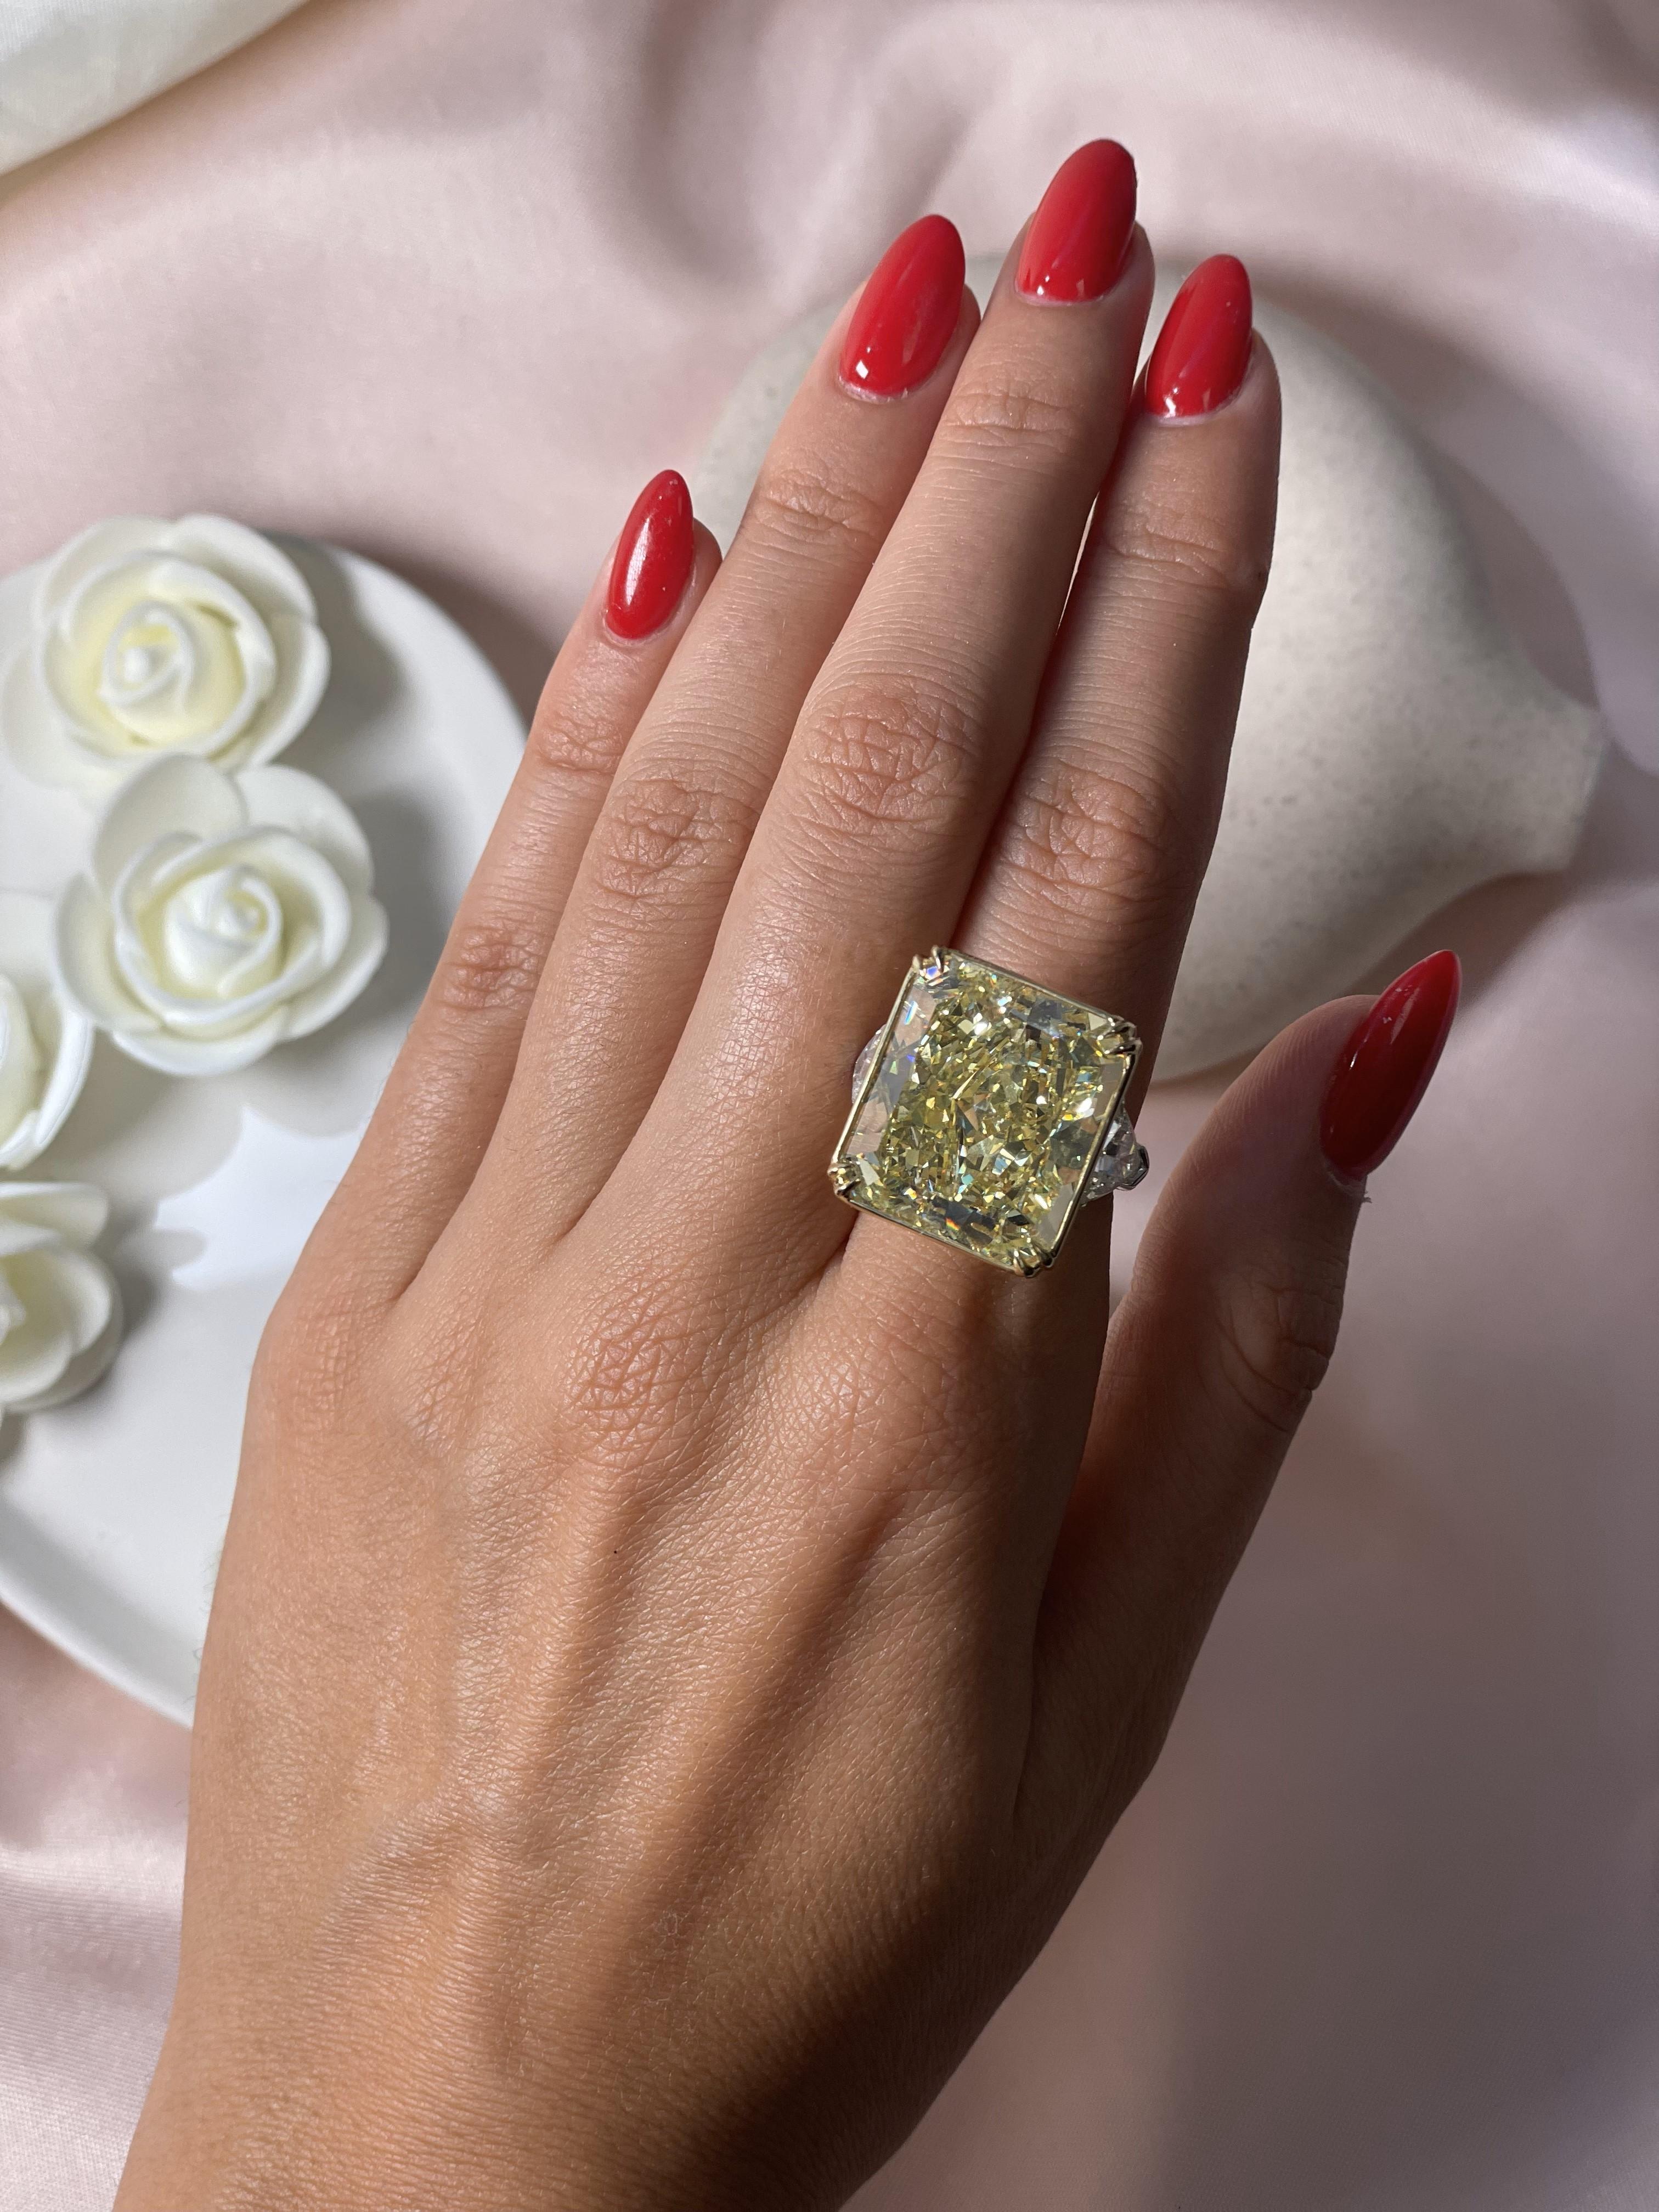 Exquisite 30-carat Fancy Intense Yellow Radiant-cut diamond engagement ring, GIA-certified as VVS2 clarity. The prominent size of the central stone transforms this ring into an absolute spectacle. It is accompanied by two Trillion-cut diamonds with